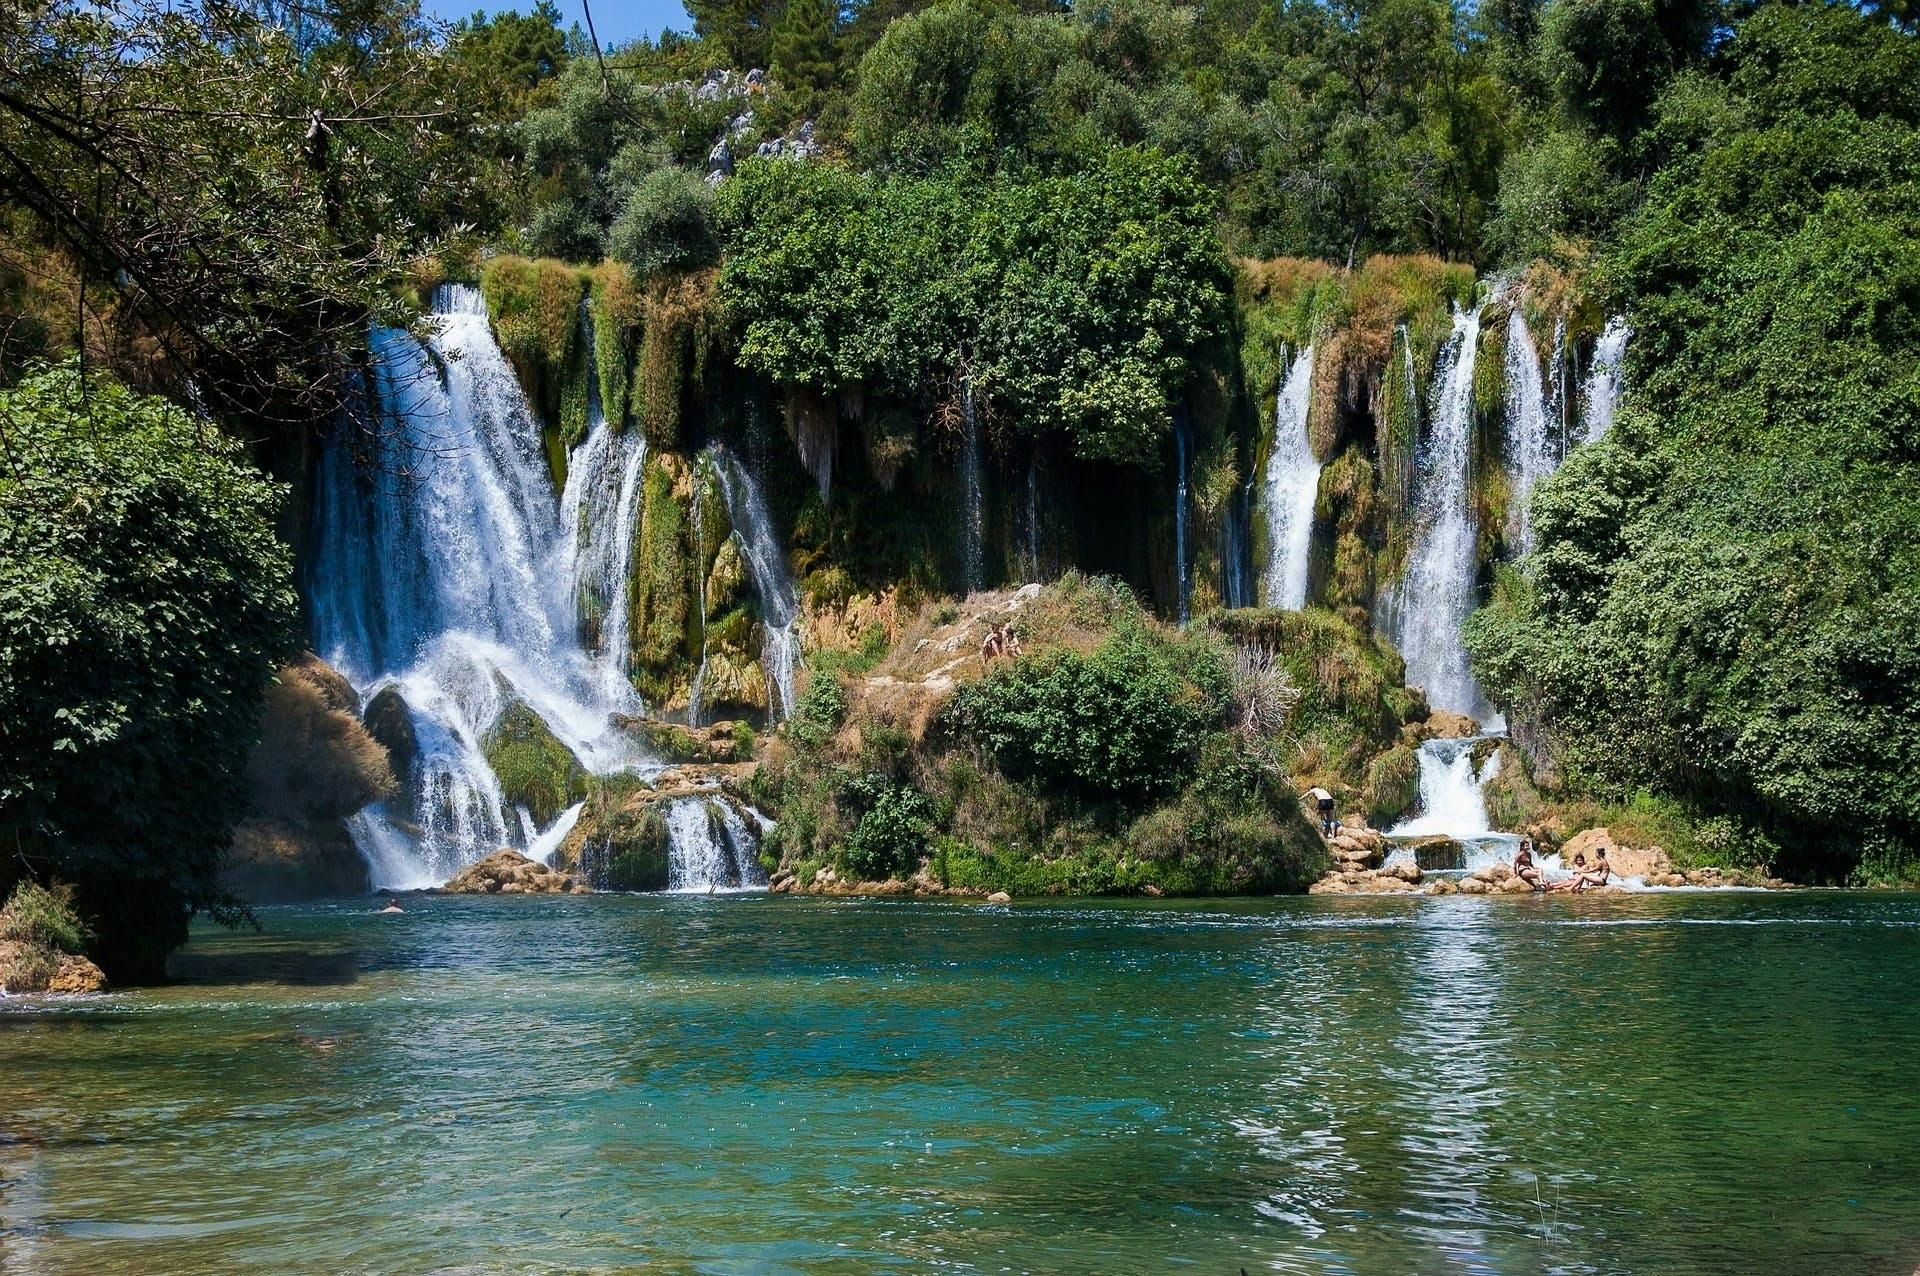 Kravice Waterfalls and Mostar private day trip from Dubrovnik